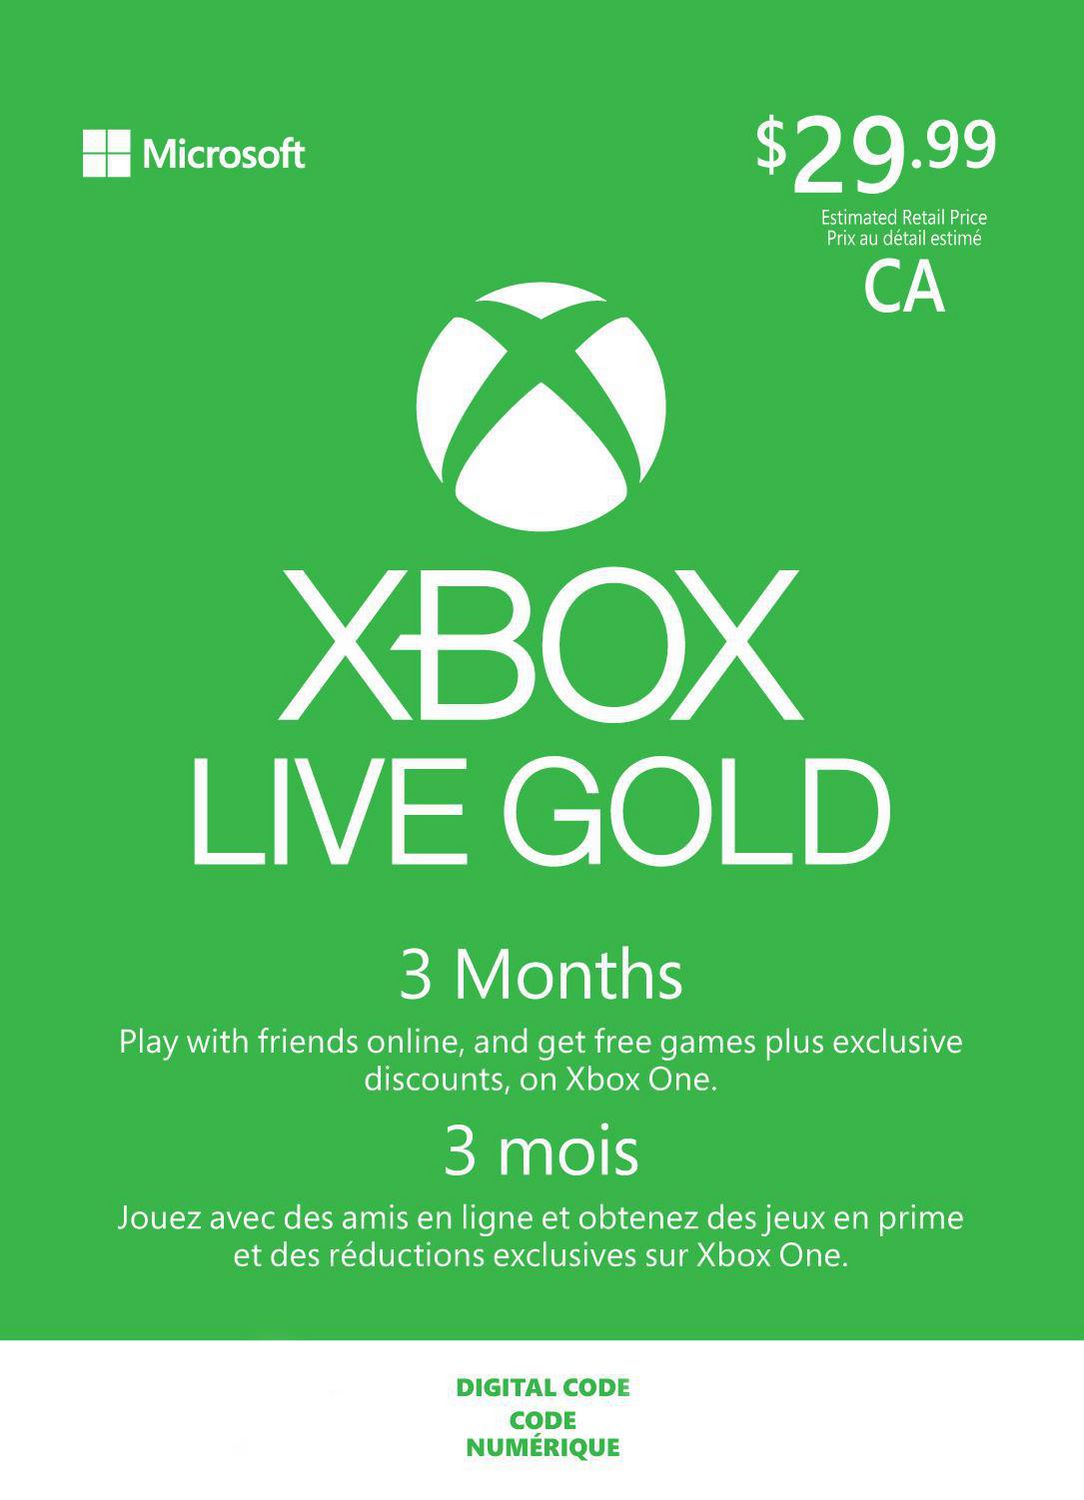 1 month xbox live cards